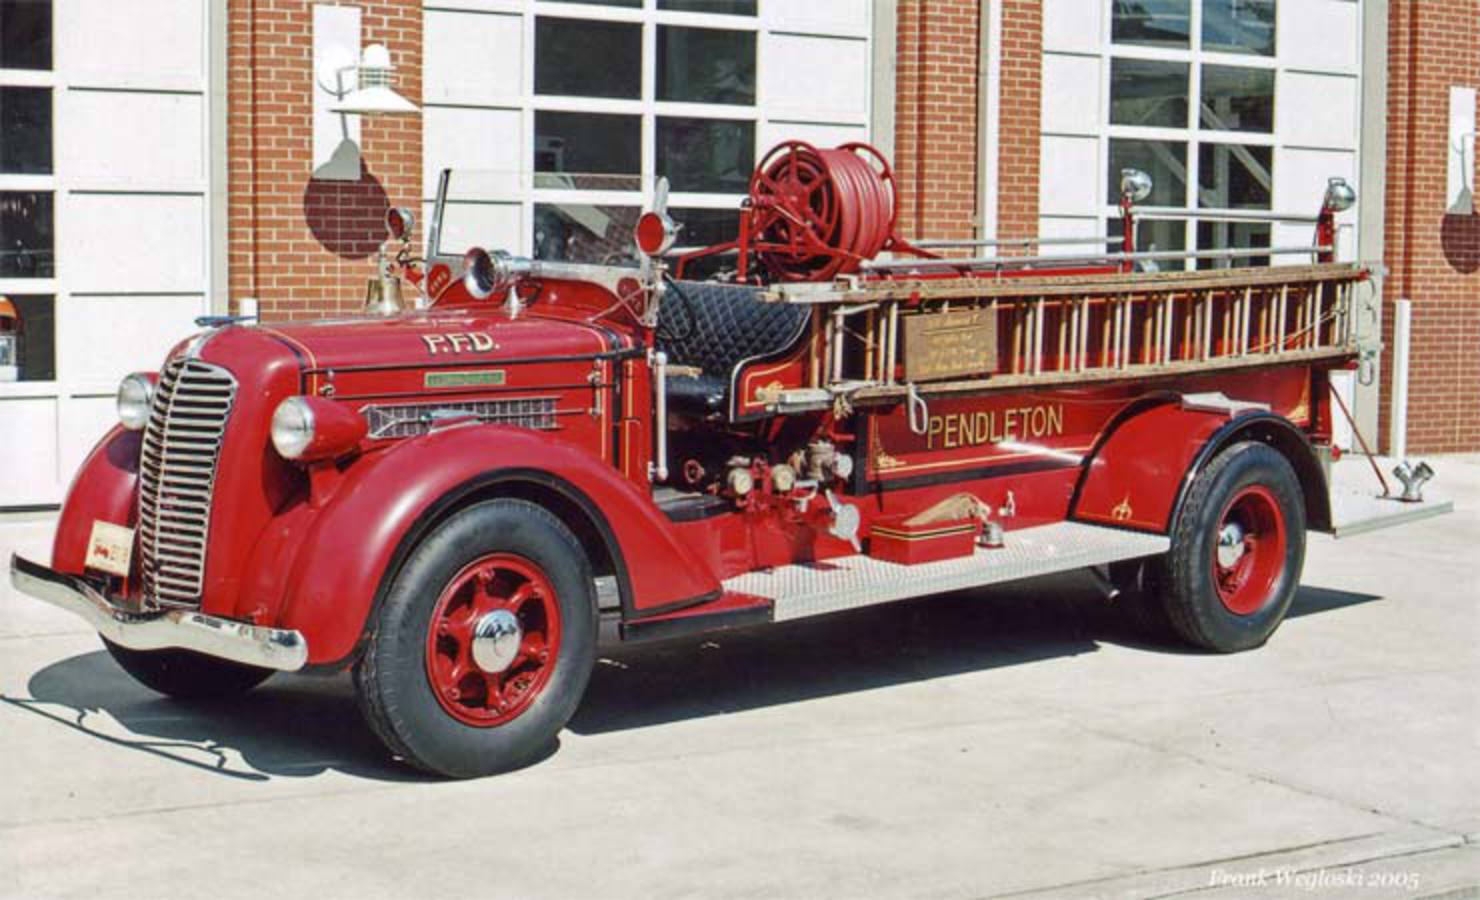 Howe Model 1B Pumper Photo Gallery: Photo #11 out of 8, Image Size ...